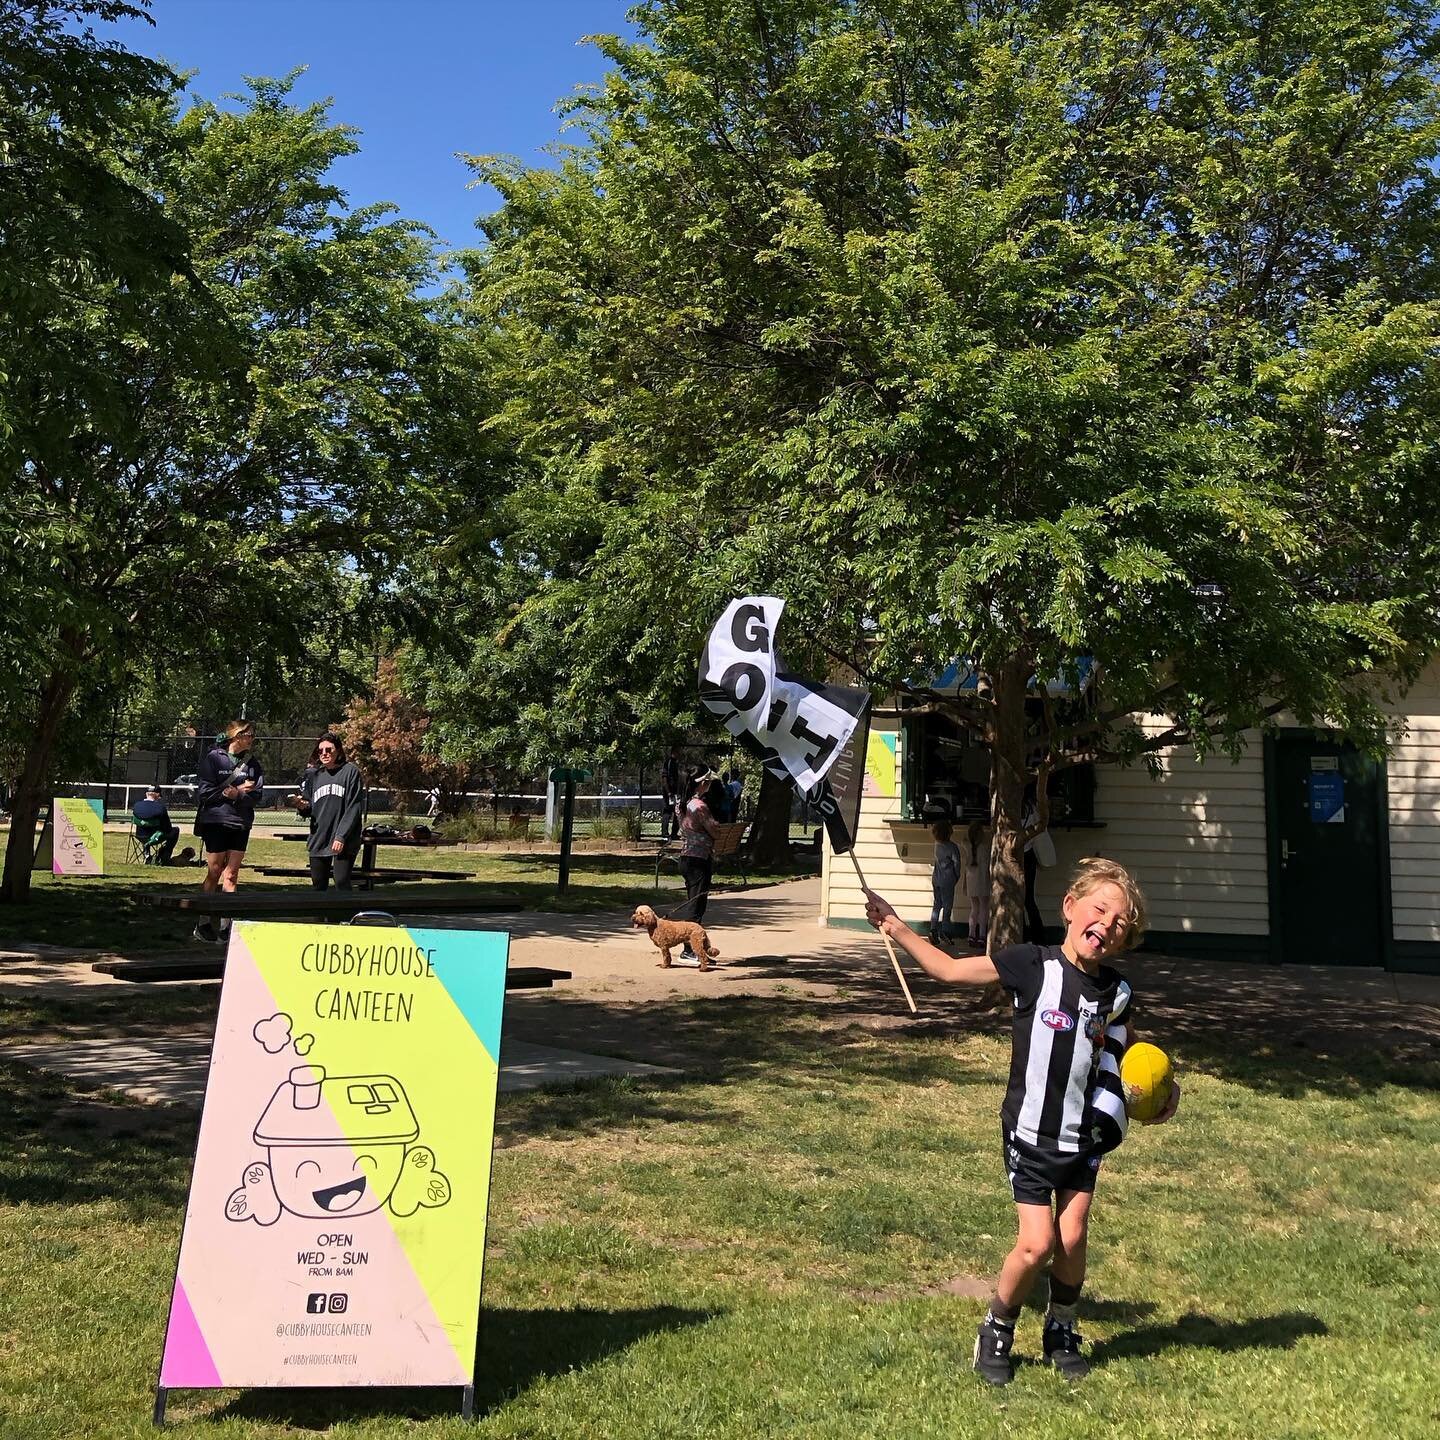 Check out lil Paddy bringing all the HOT PIE VIBES to the park today!! 🙌
@cubbyhousecanteen 

@samantha_waters_ @collingwood_fc 

#hotpievibes #aflgrandfinal #collingwoodfc #fan #seeyouatthepark #communitykindnessconnection #cubbyhousecanteen